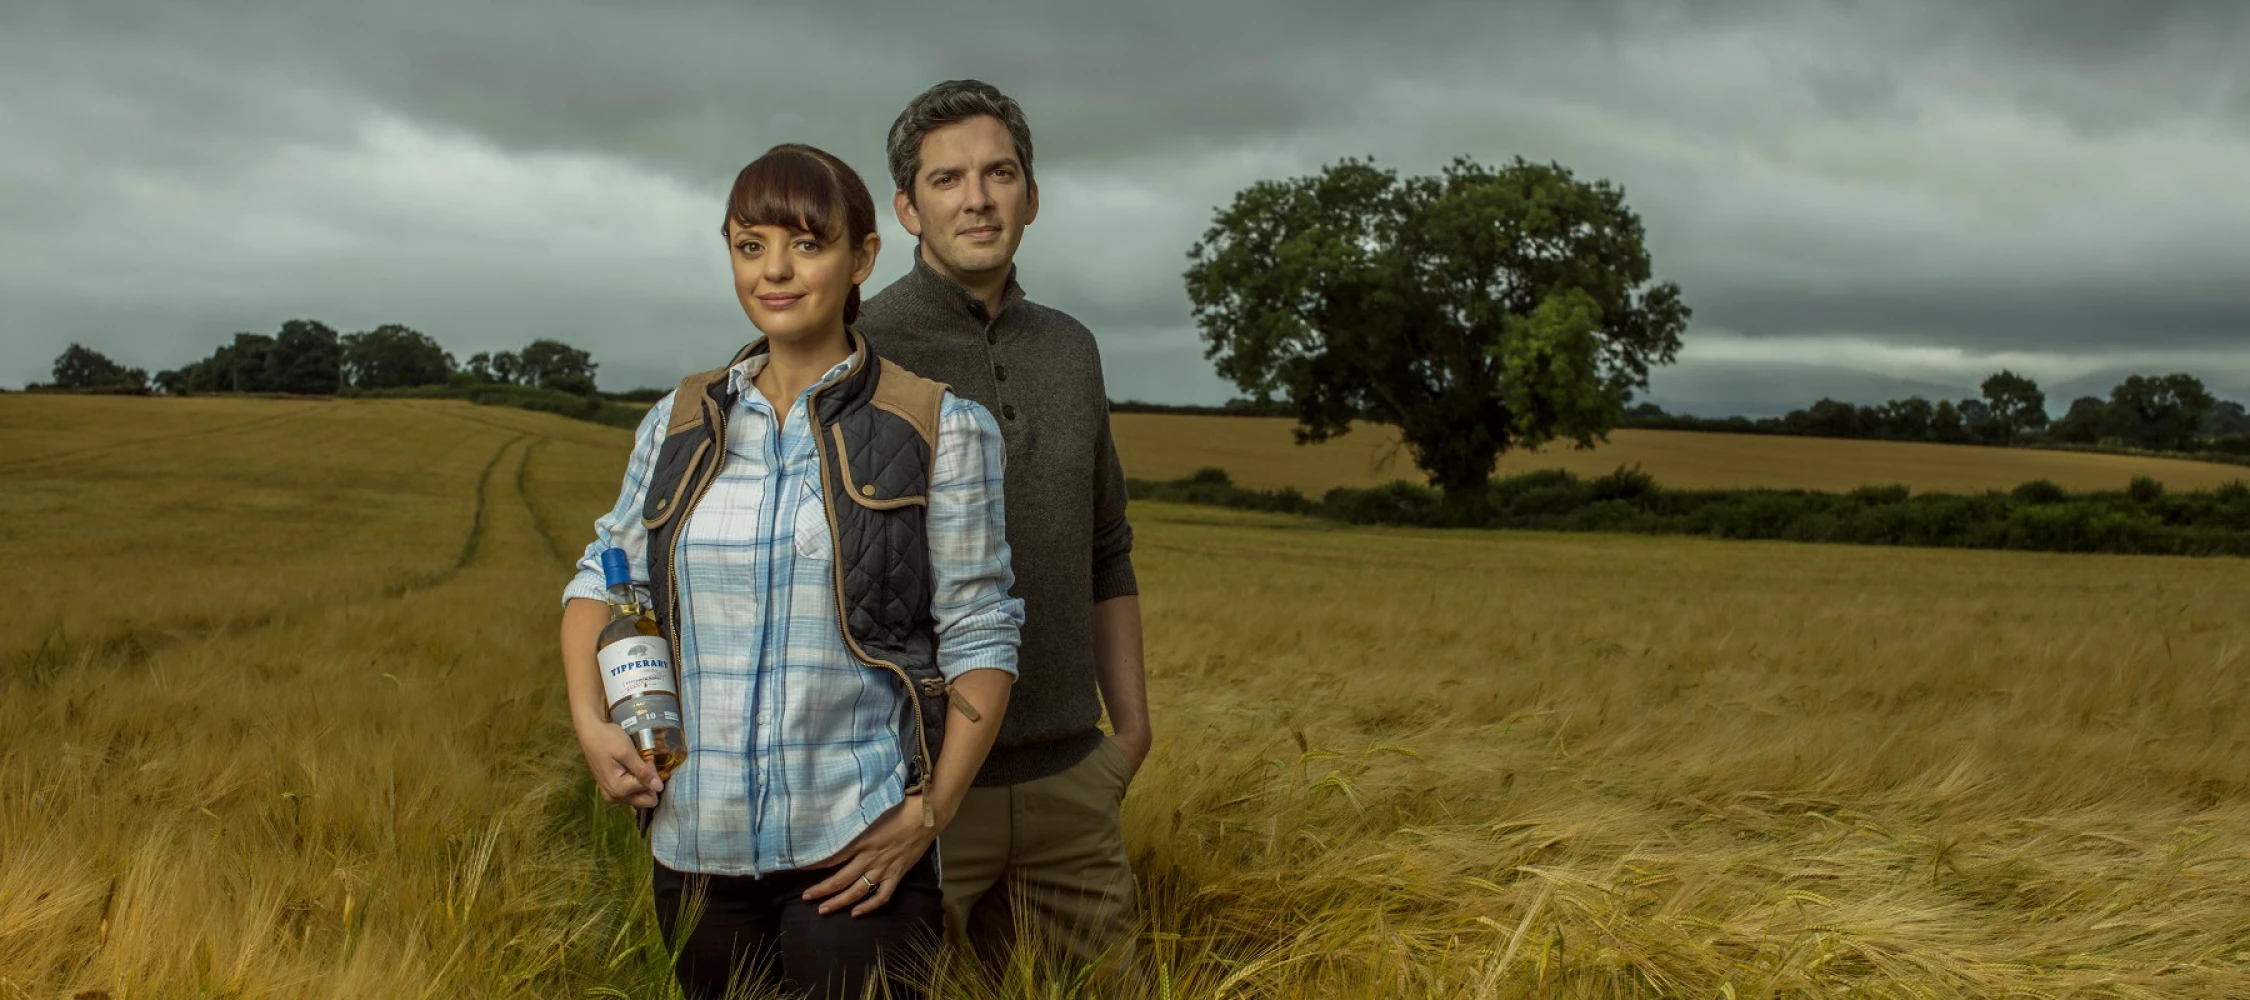 Jennifer and Liam in a field holding a bottle of Watershed whiskey 